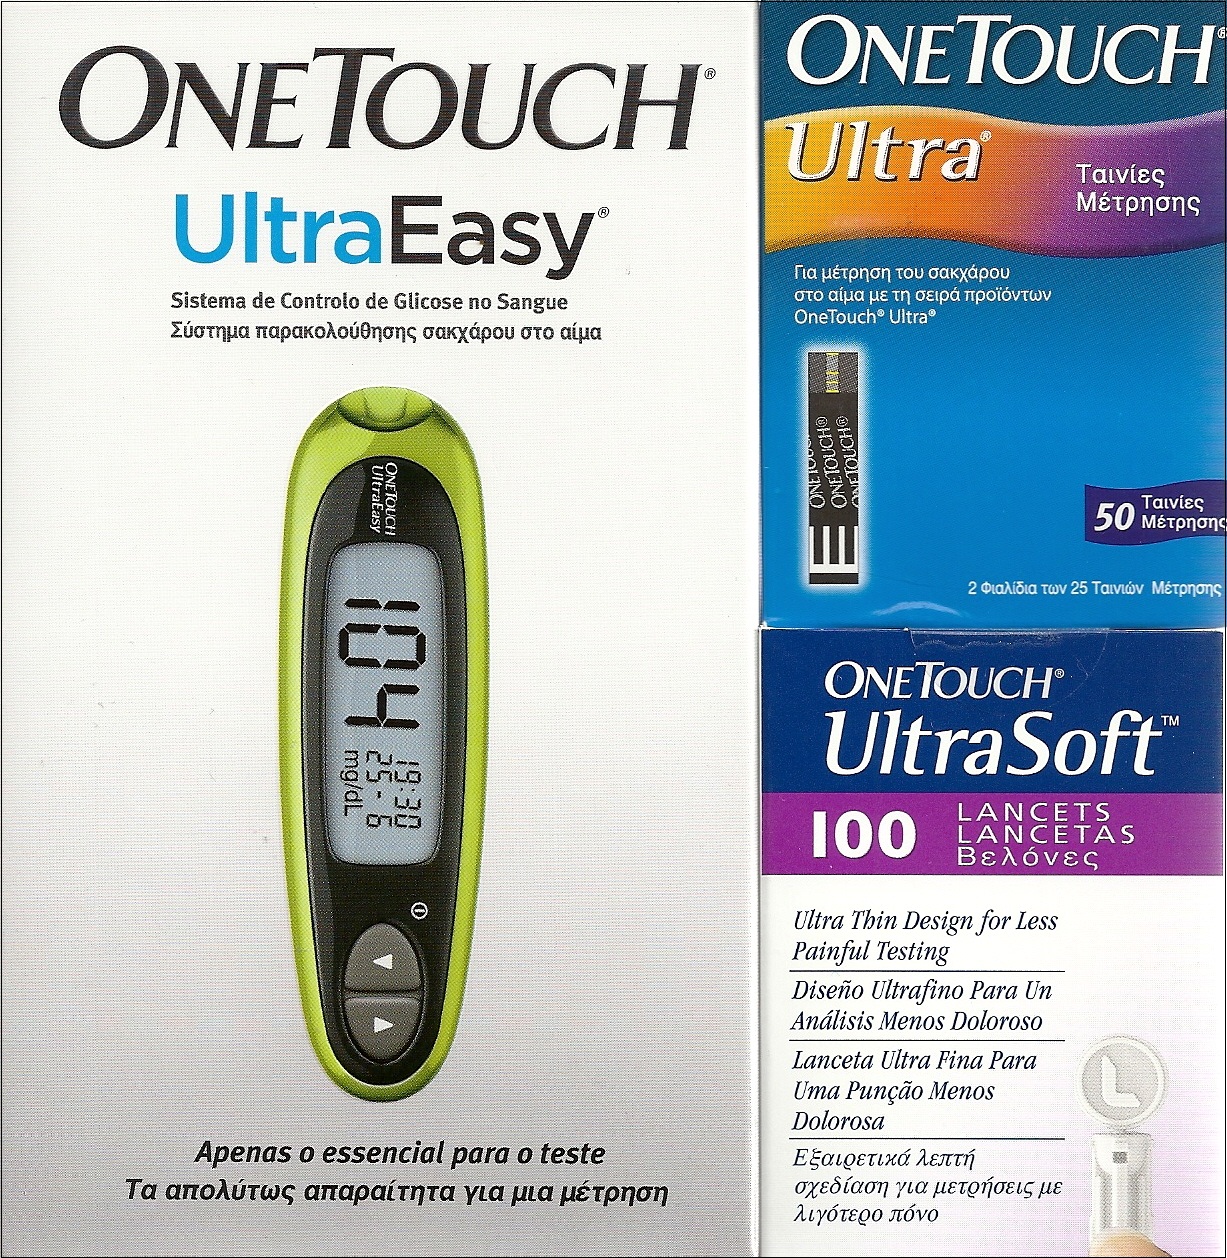 Thermisch rol Leia LIFESCAN OneTouch UltraEasy Glucose Meter + One Touch Ultra Strips 50pcs +  OneTouch UltraSoft 100pcs - PharmaPoli.com